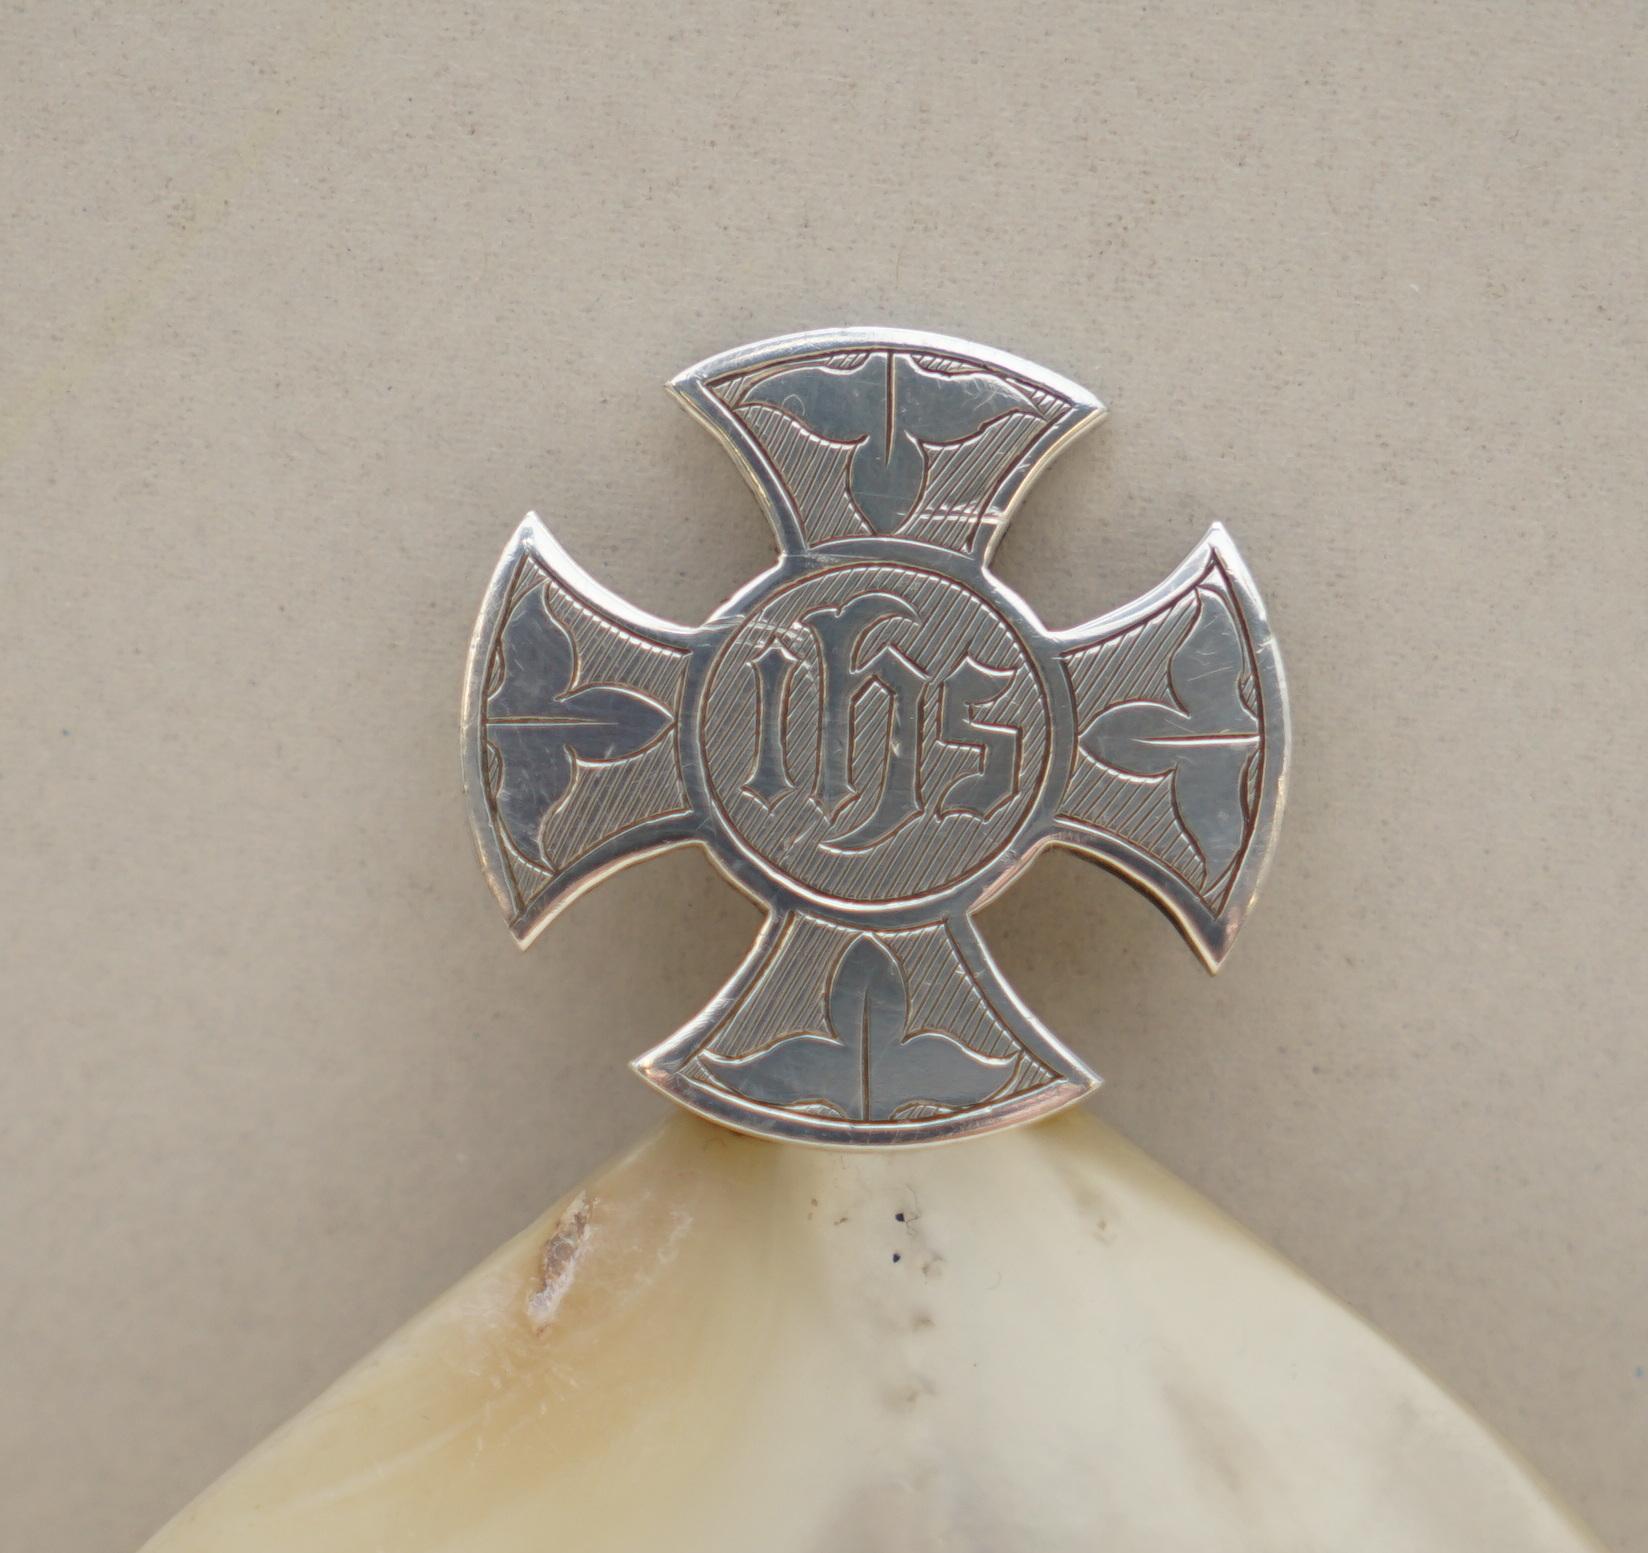 Wimbledon-Furniture

Wimbledon-Furniture is delighted to offer for sale this sublime 1931 Sterling silver handled with mother of pearl Baptismal dish for Christian Baptisms 

The piece is fully hallmarked with the makers mark A.R.M & Co LTD for